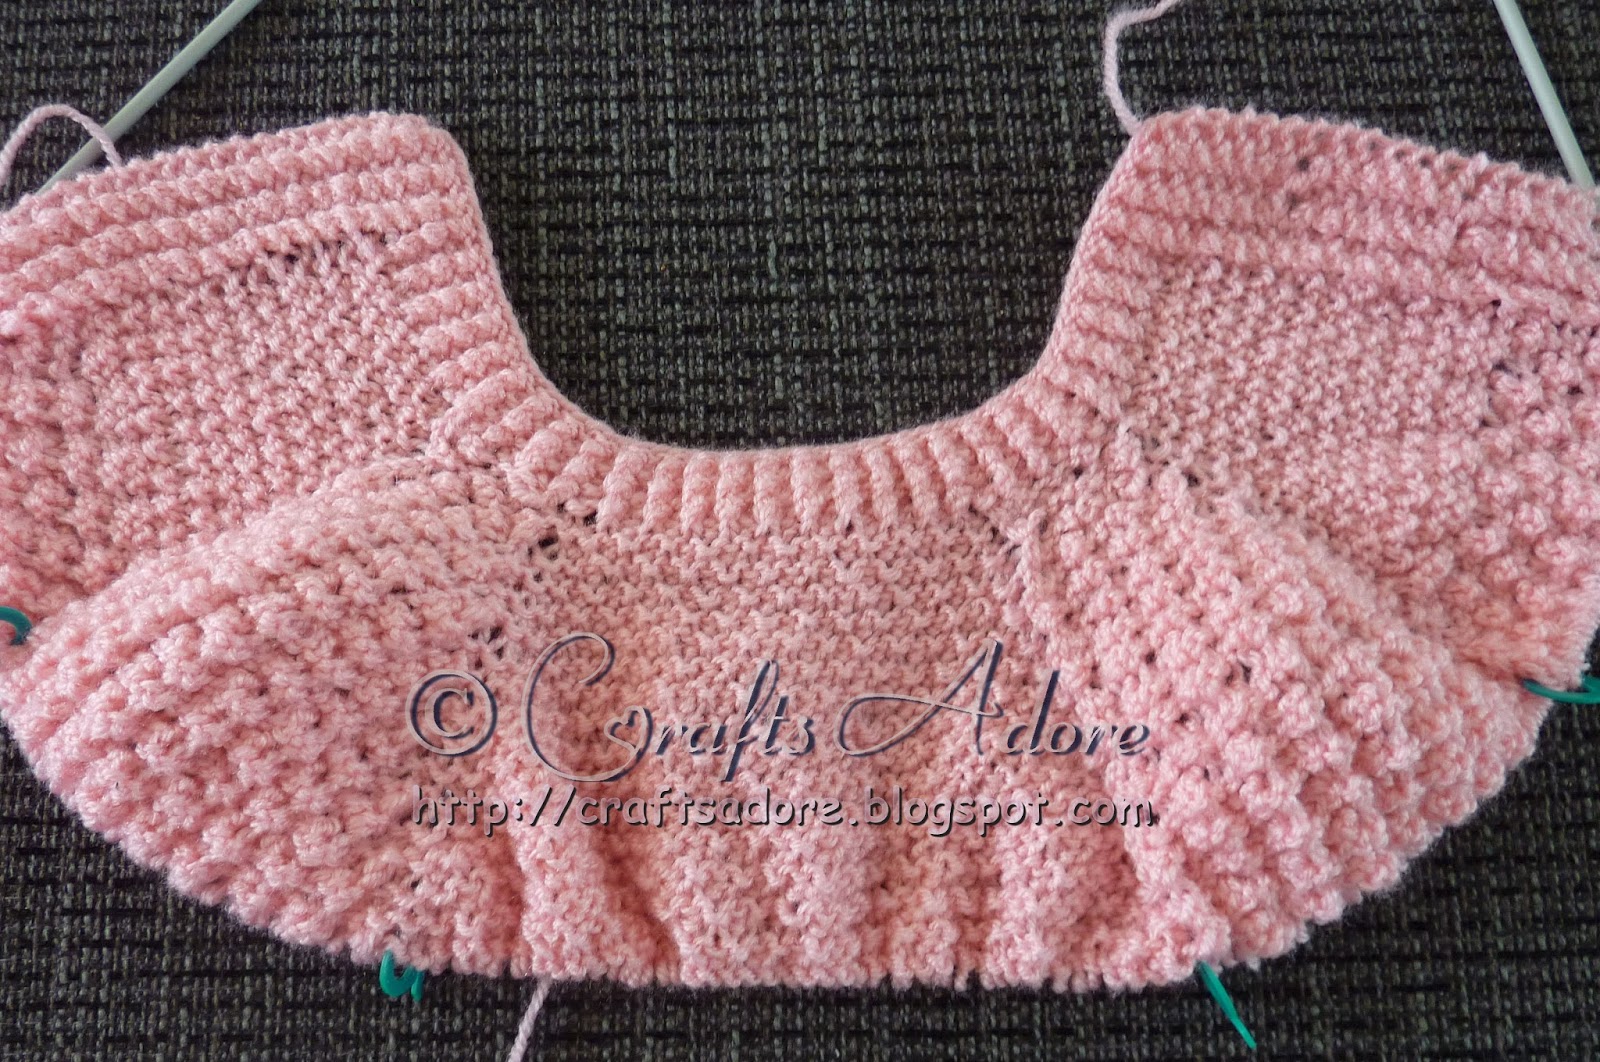 CraftsAdore: Knitted Baby Girl Layette Free Knitting Pattern